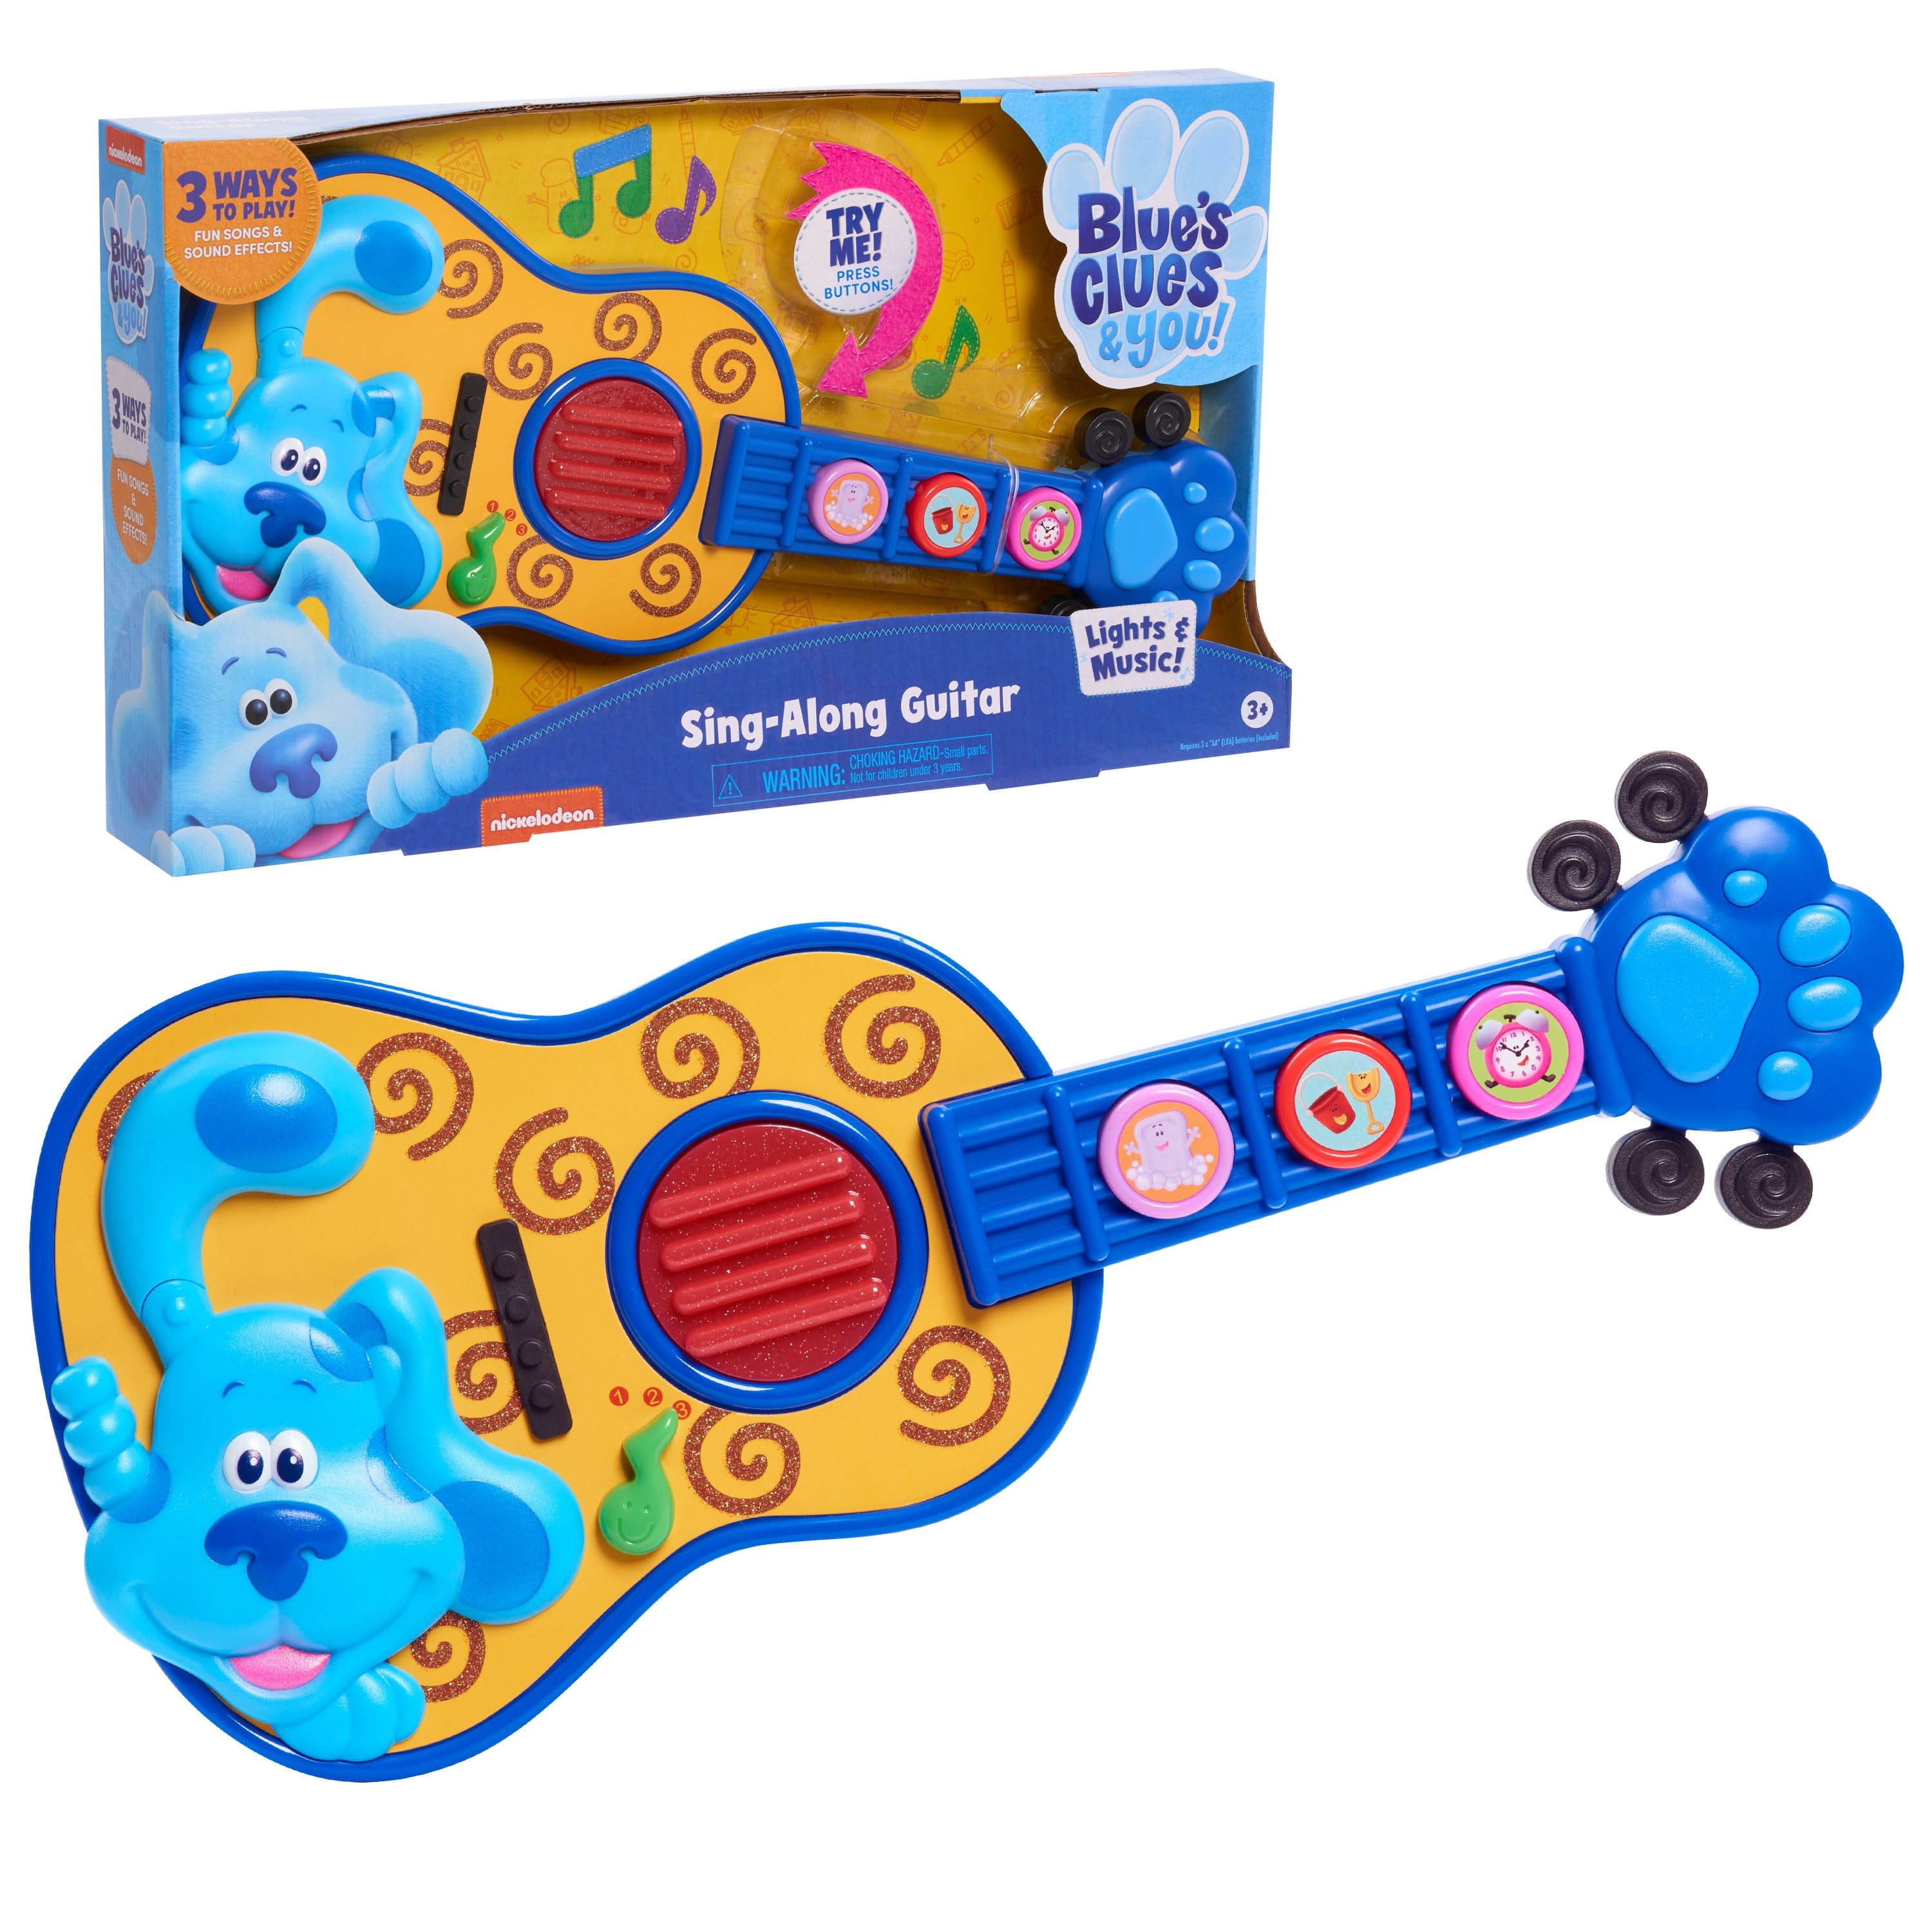 CHILDRENS KIDS CHILDS EASY PLAY TOY MUSICAL GUITAR IN RETAIL BOX NEW 